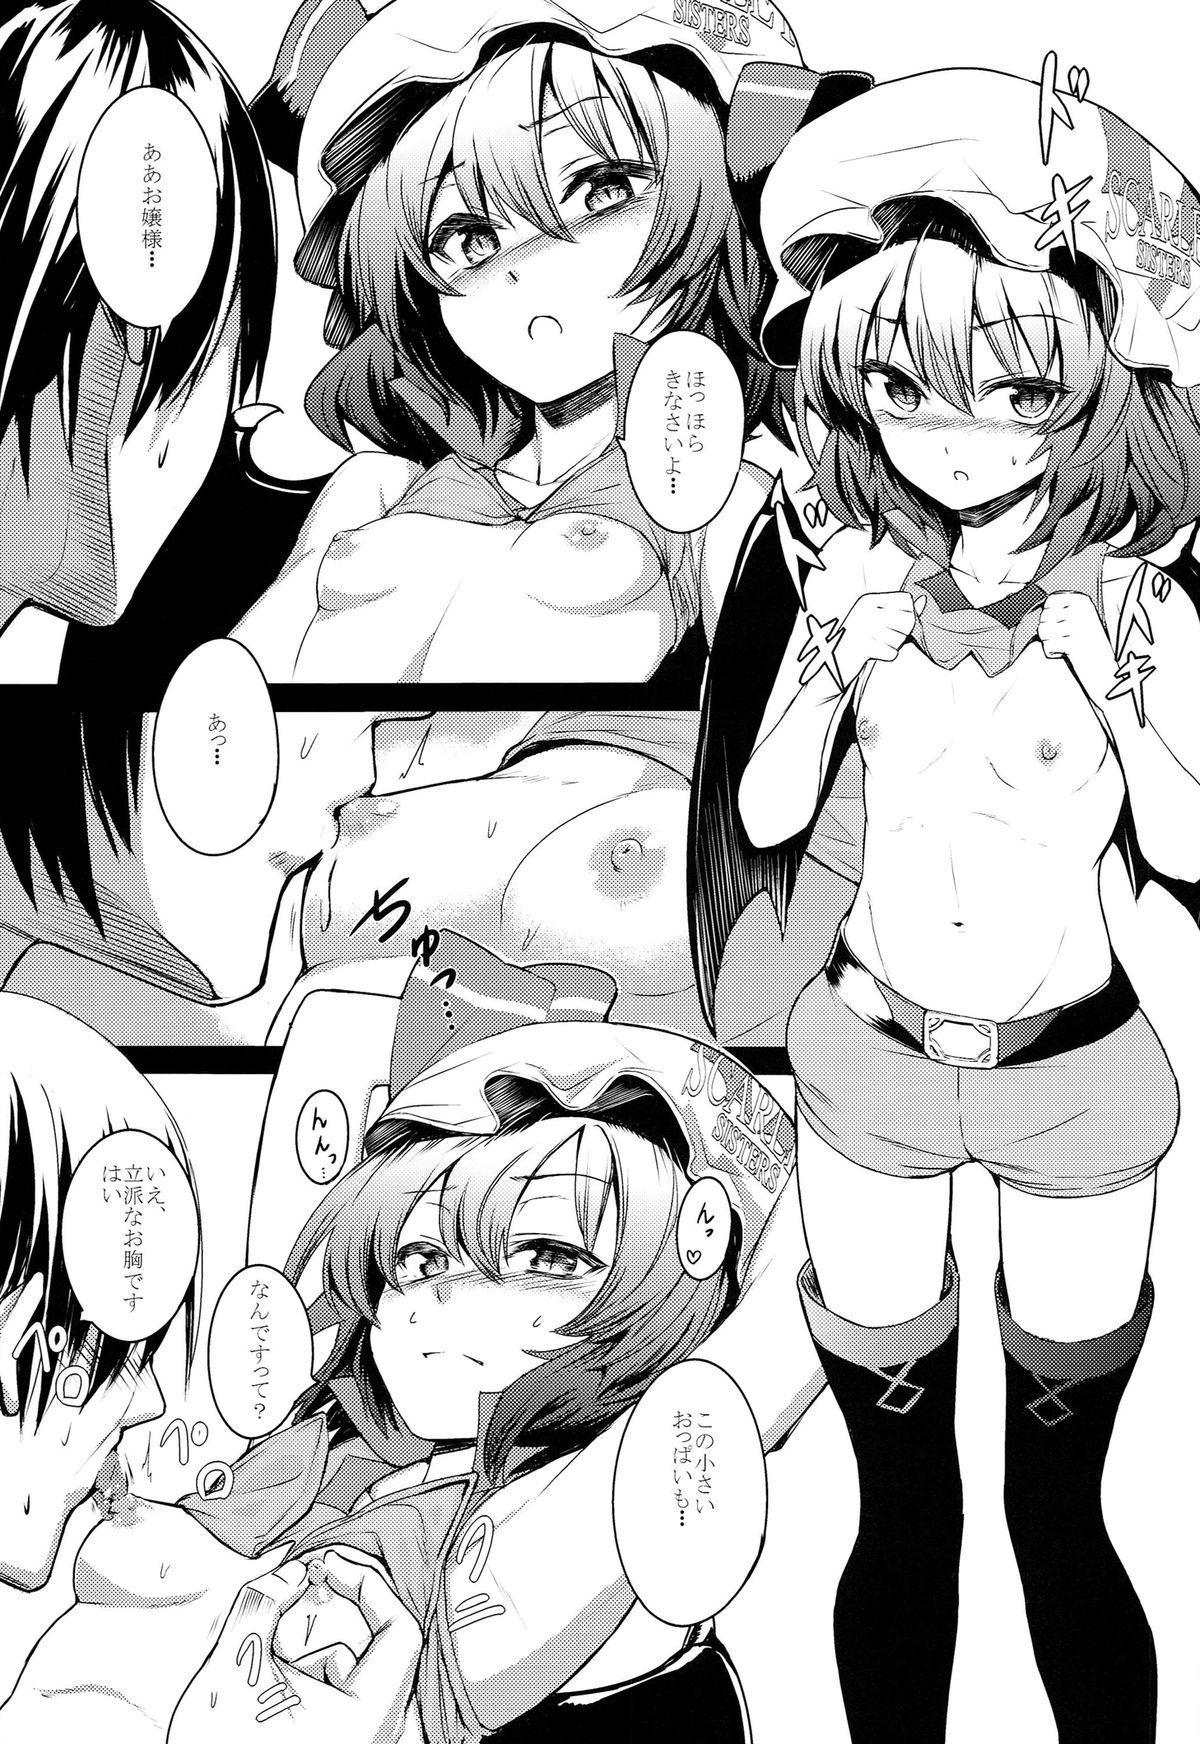 Bbw TOUHOU RACE QUEENS COLLABO CLUB - Touhou project Cum - Page 6